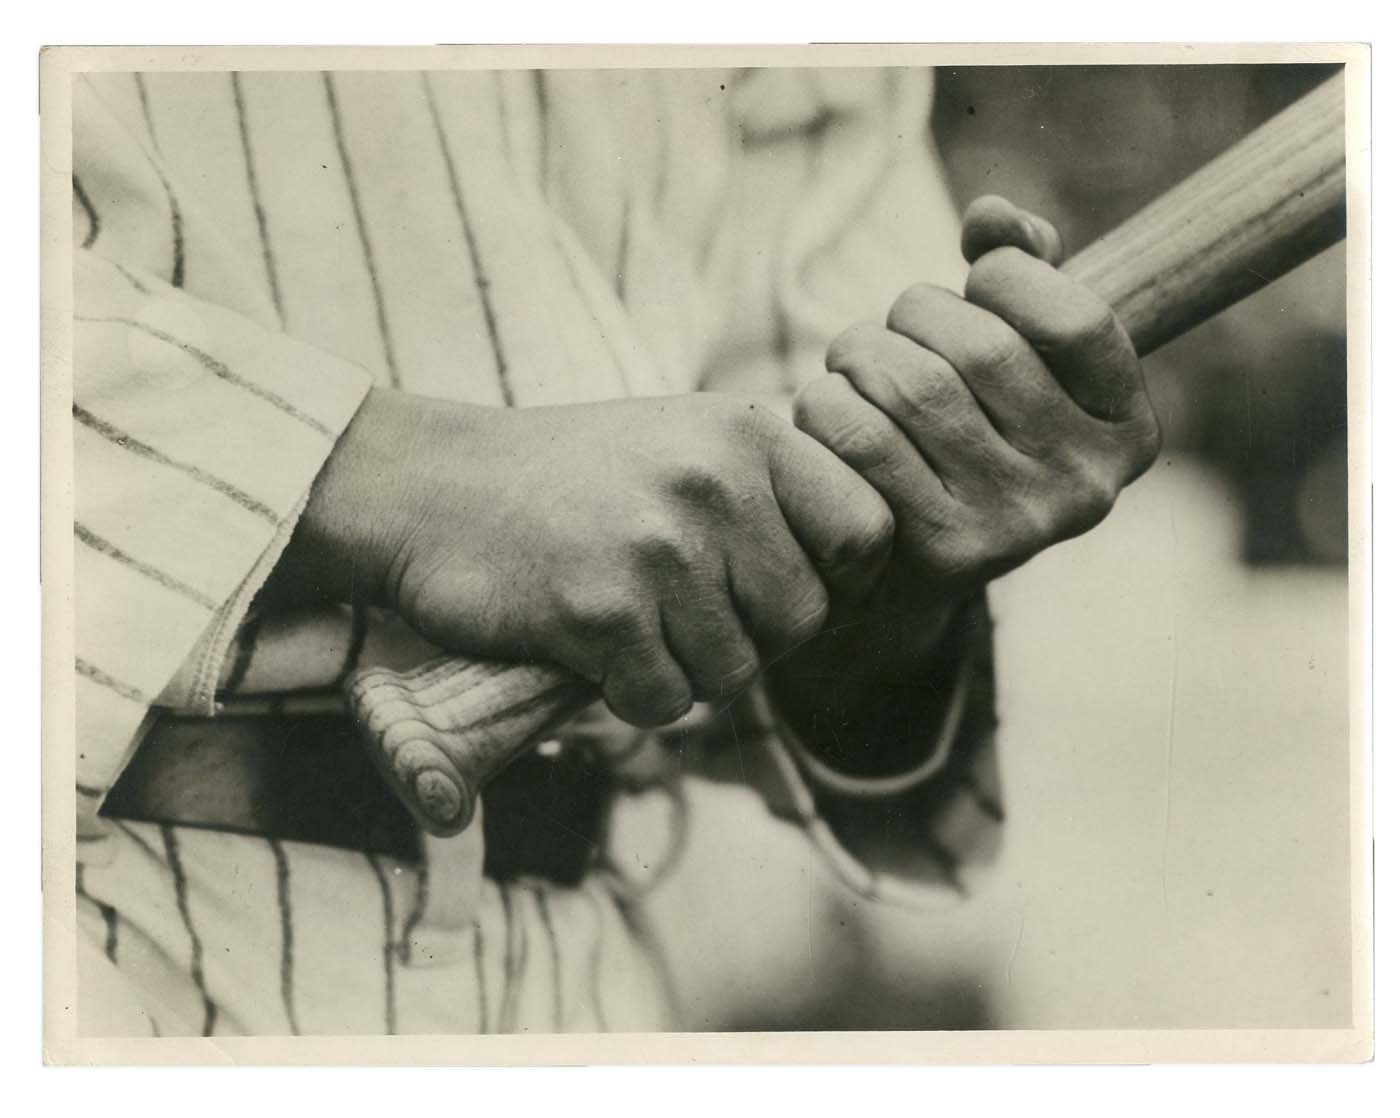 Ruth and Gehrig - Circa 1927 Lou Gehrig "Batting Hands" Type I Photo by Charles Conlon